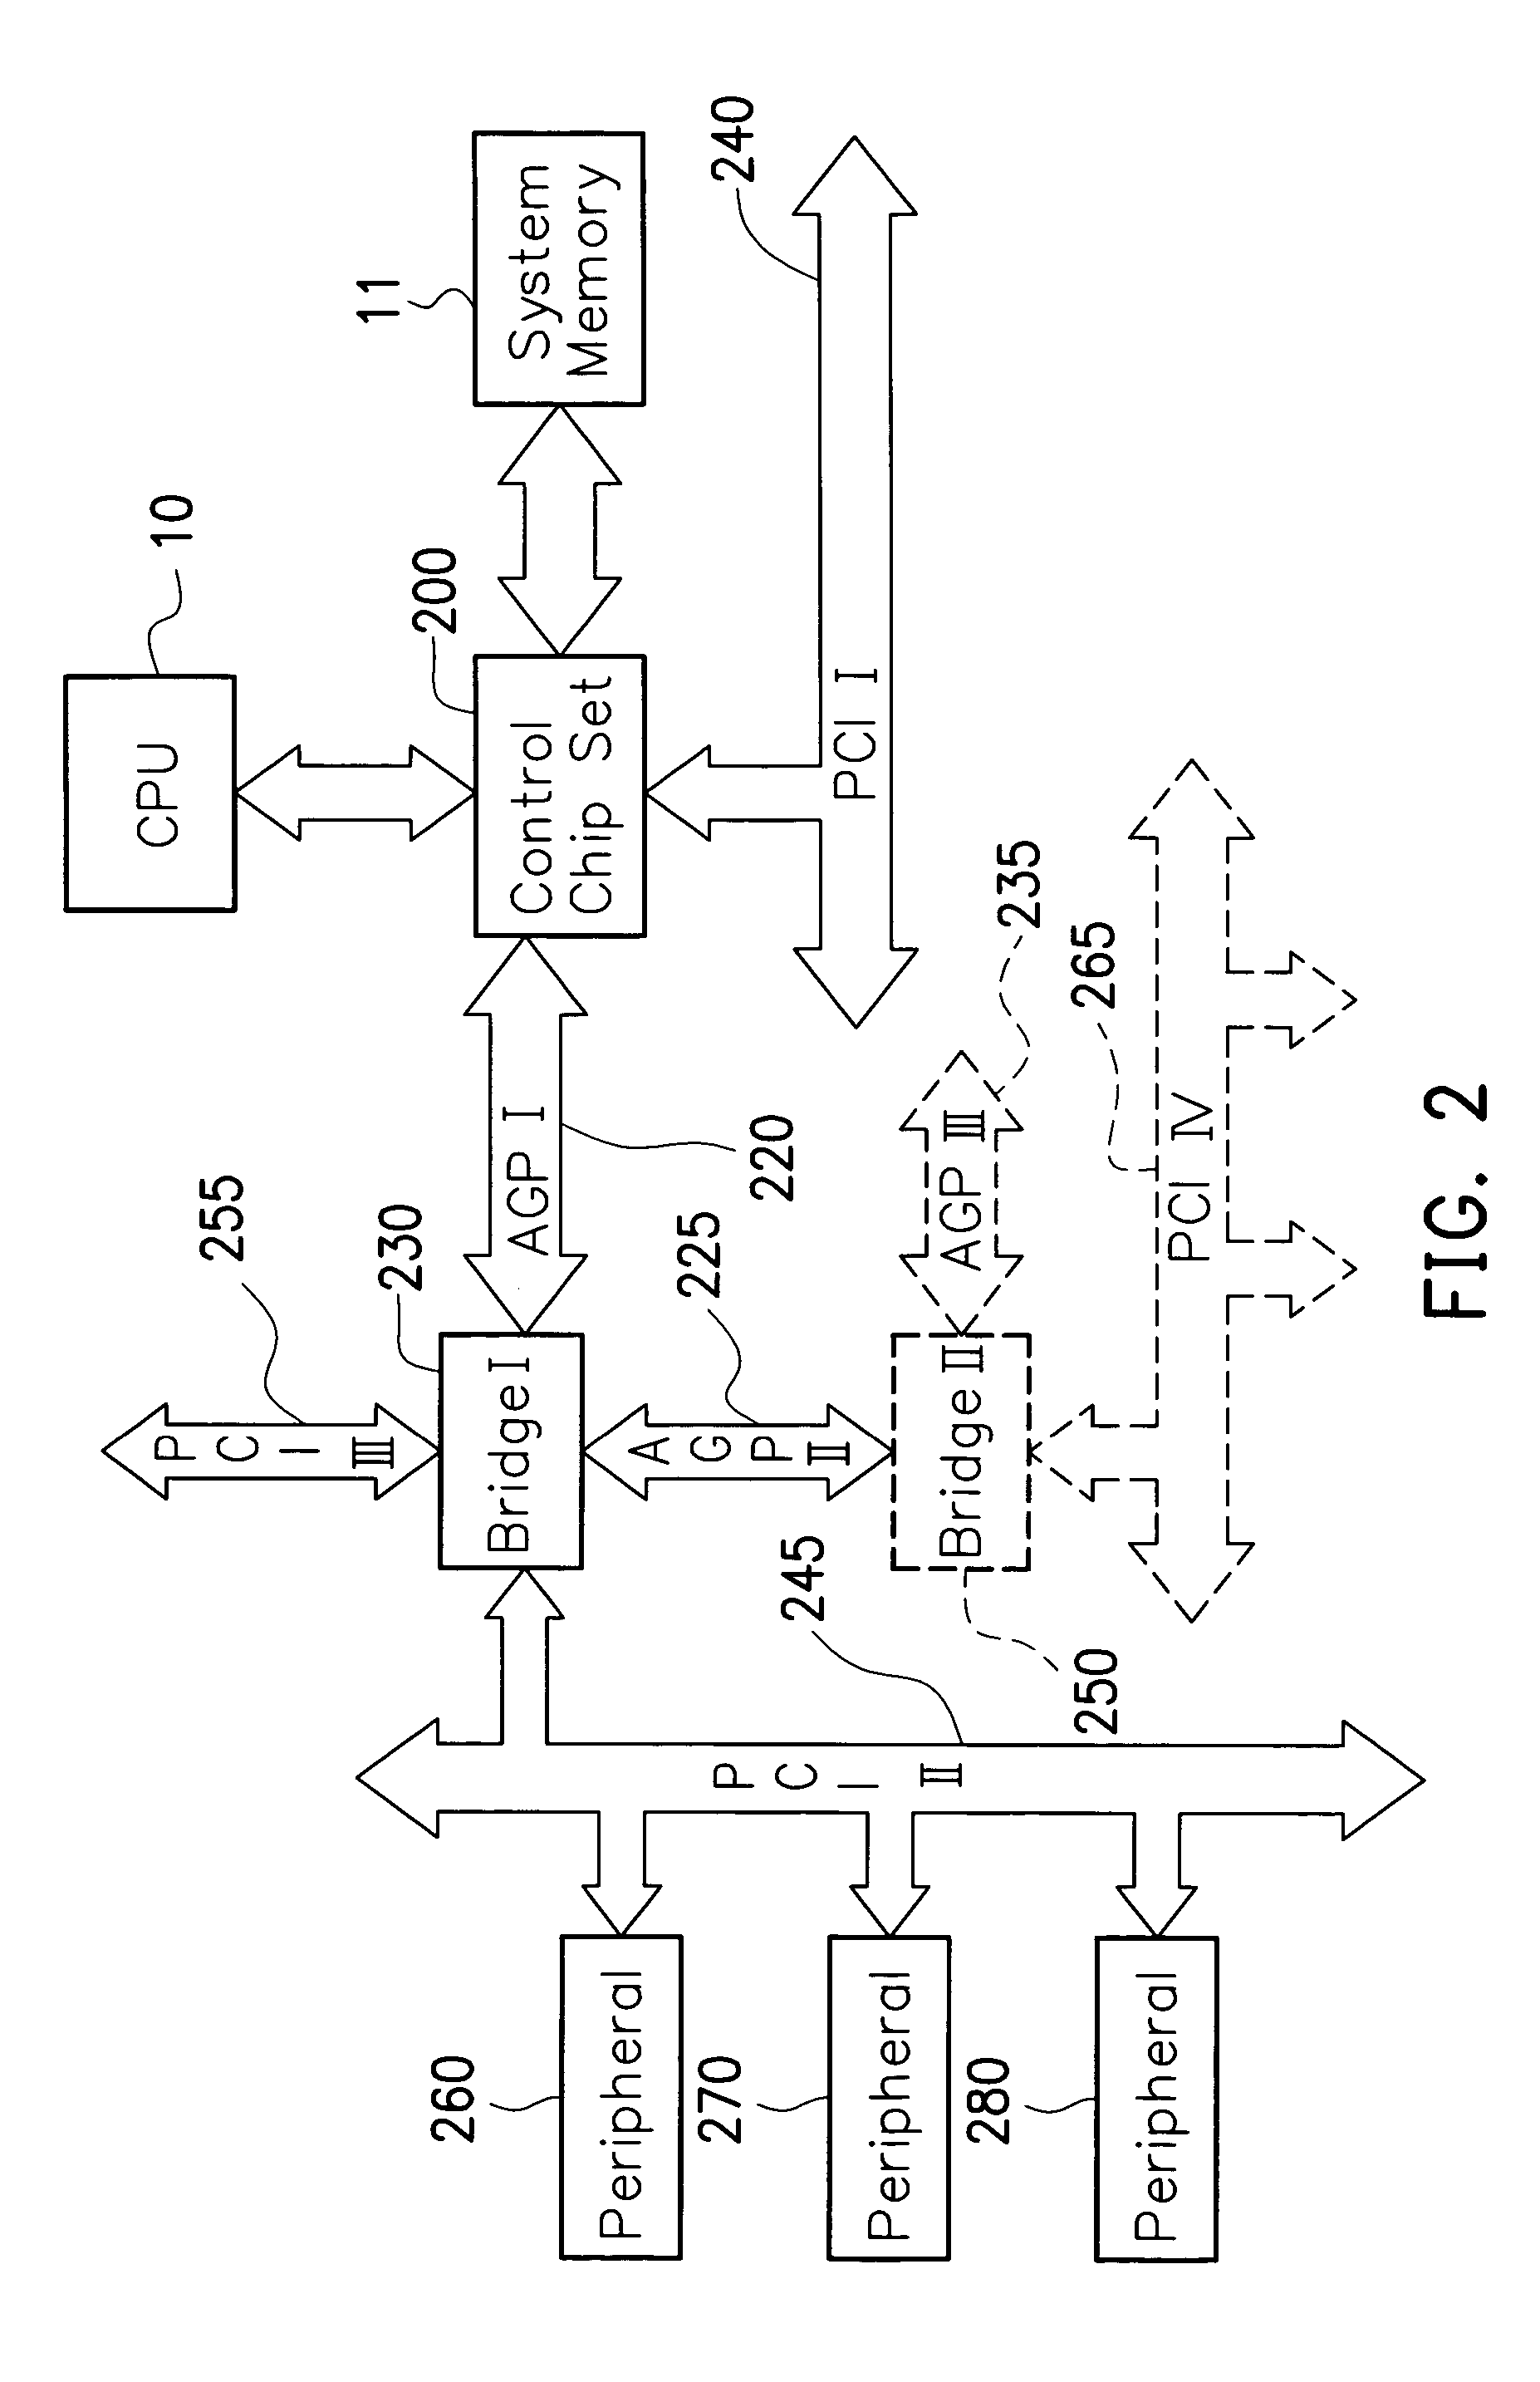 Structure and method for extended bus and bridge in the extended bus